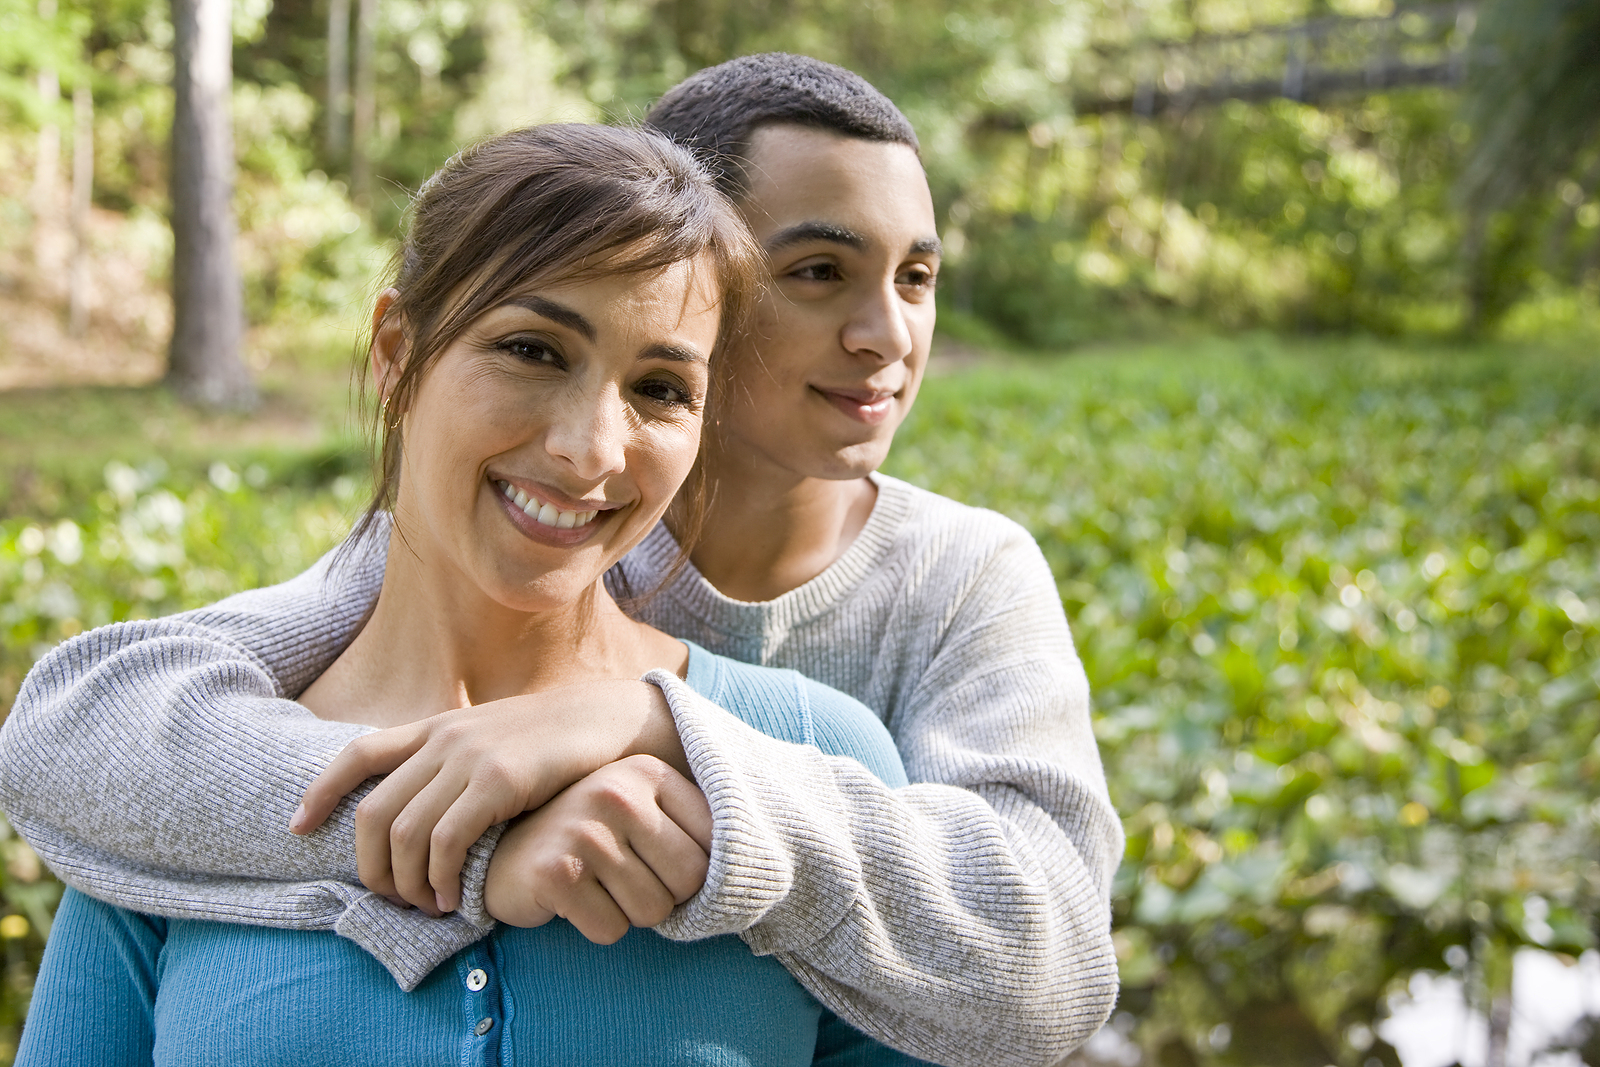 A latin mom smiles as her son has his arms around her and smiles while they are outdoors.